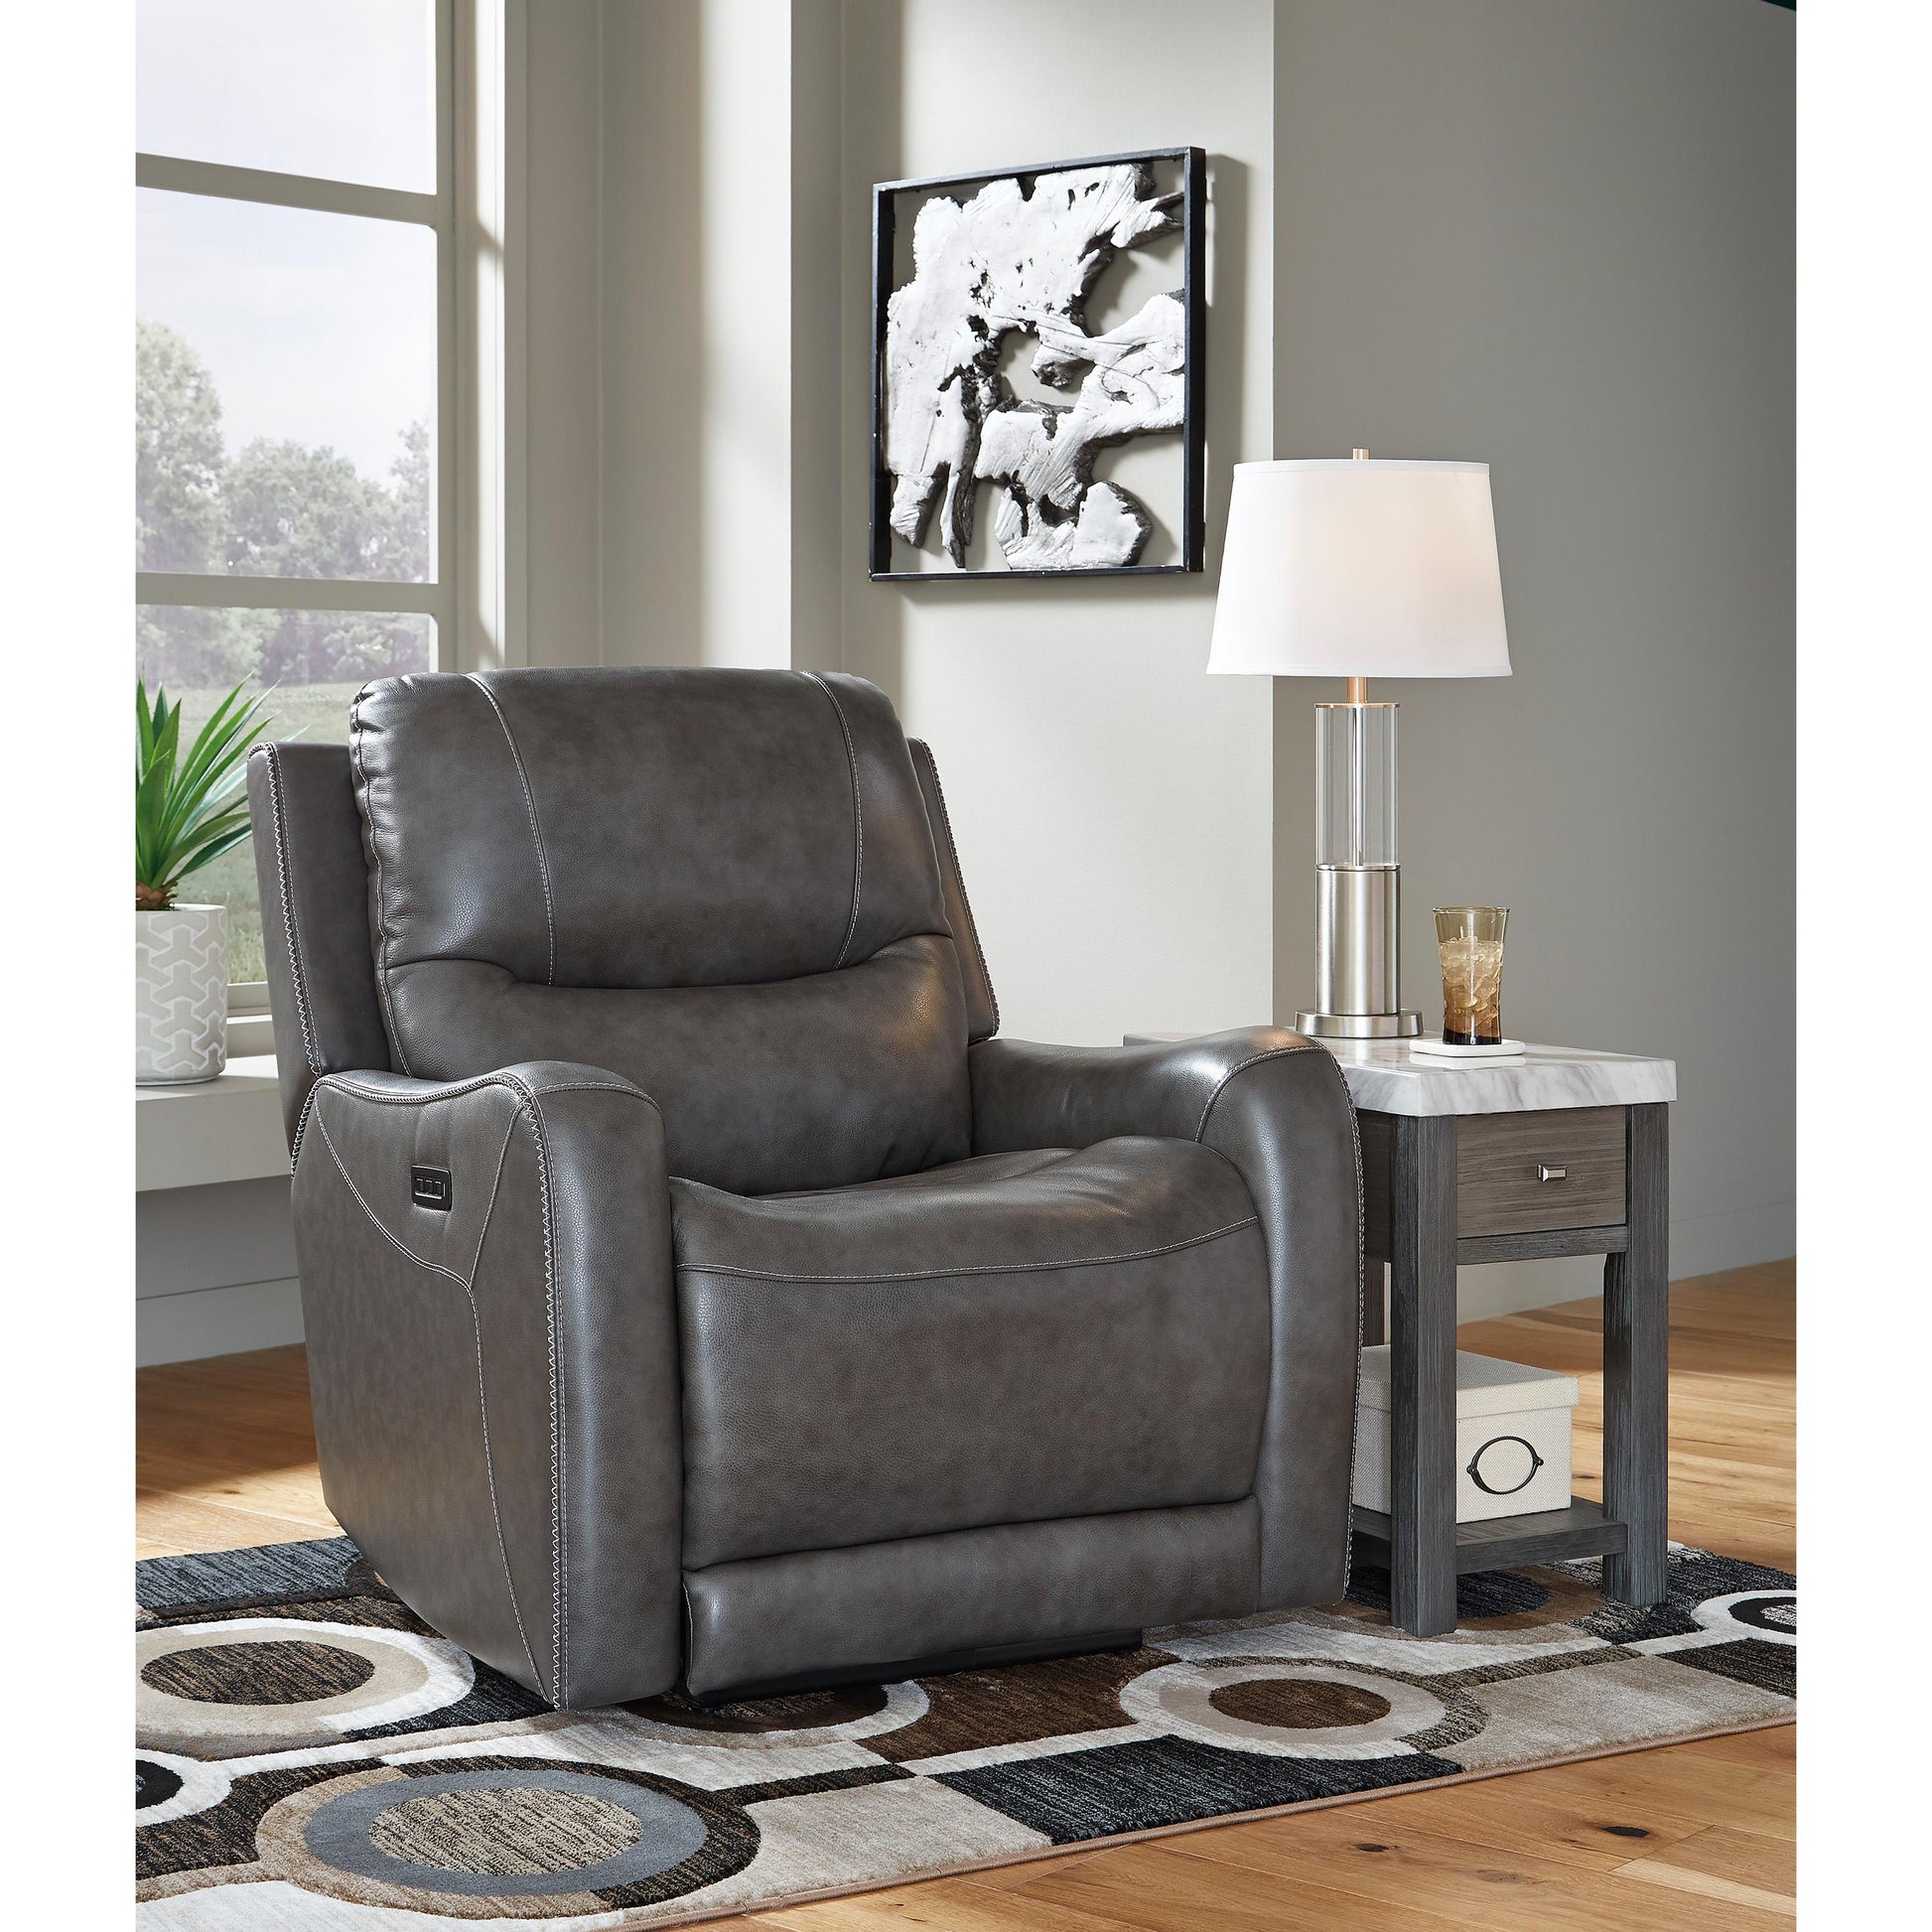 Signature Design by Ashley Galahad Power Leather Look Recliner with Wall Recline 6610306 IMAGE 7